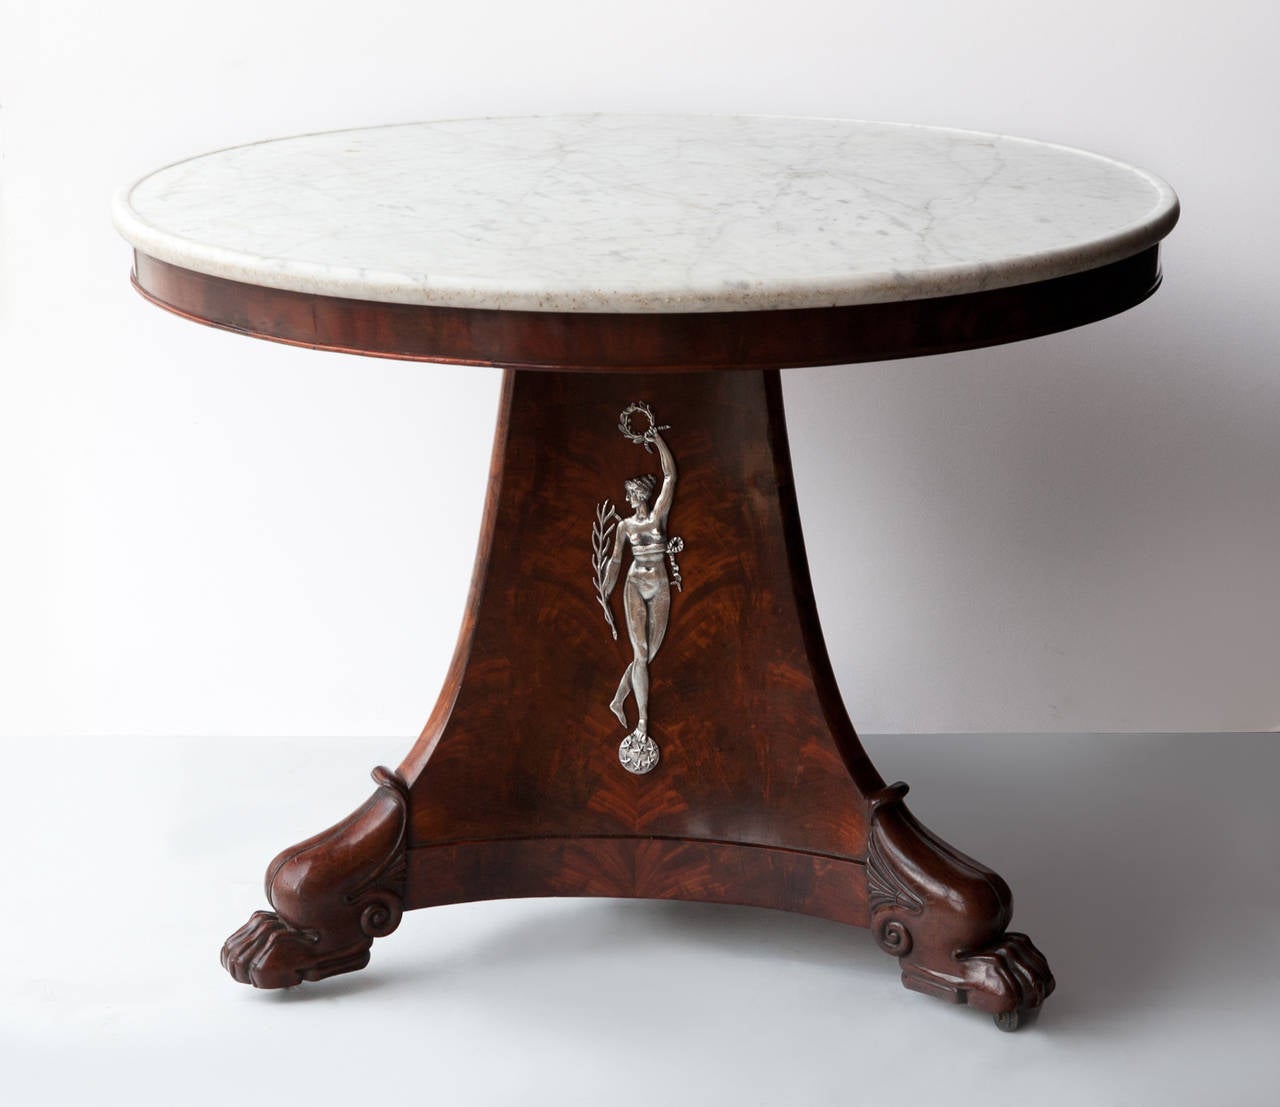 Mahogany and flame mahogany veneer standing on a concave triangular base with paw feet and later castors. White veined carrara marble top on shallow apron. Incised bronze silver plated figures holding laurel wreaths standing on balls decorated with